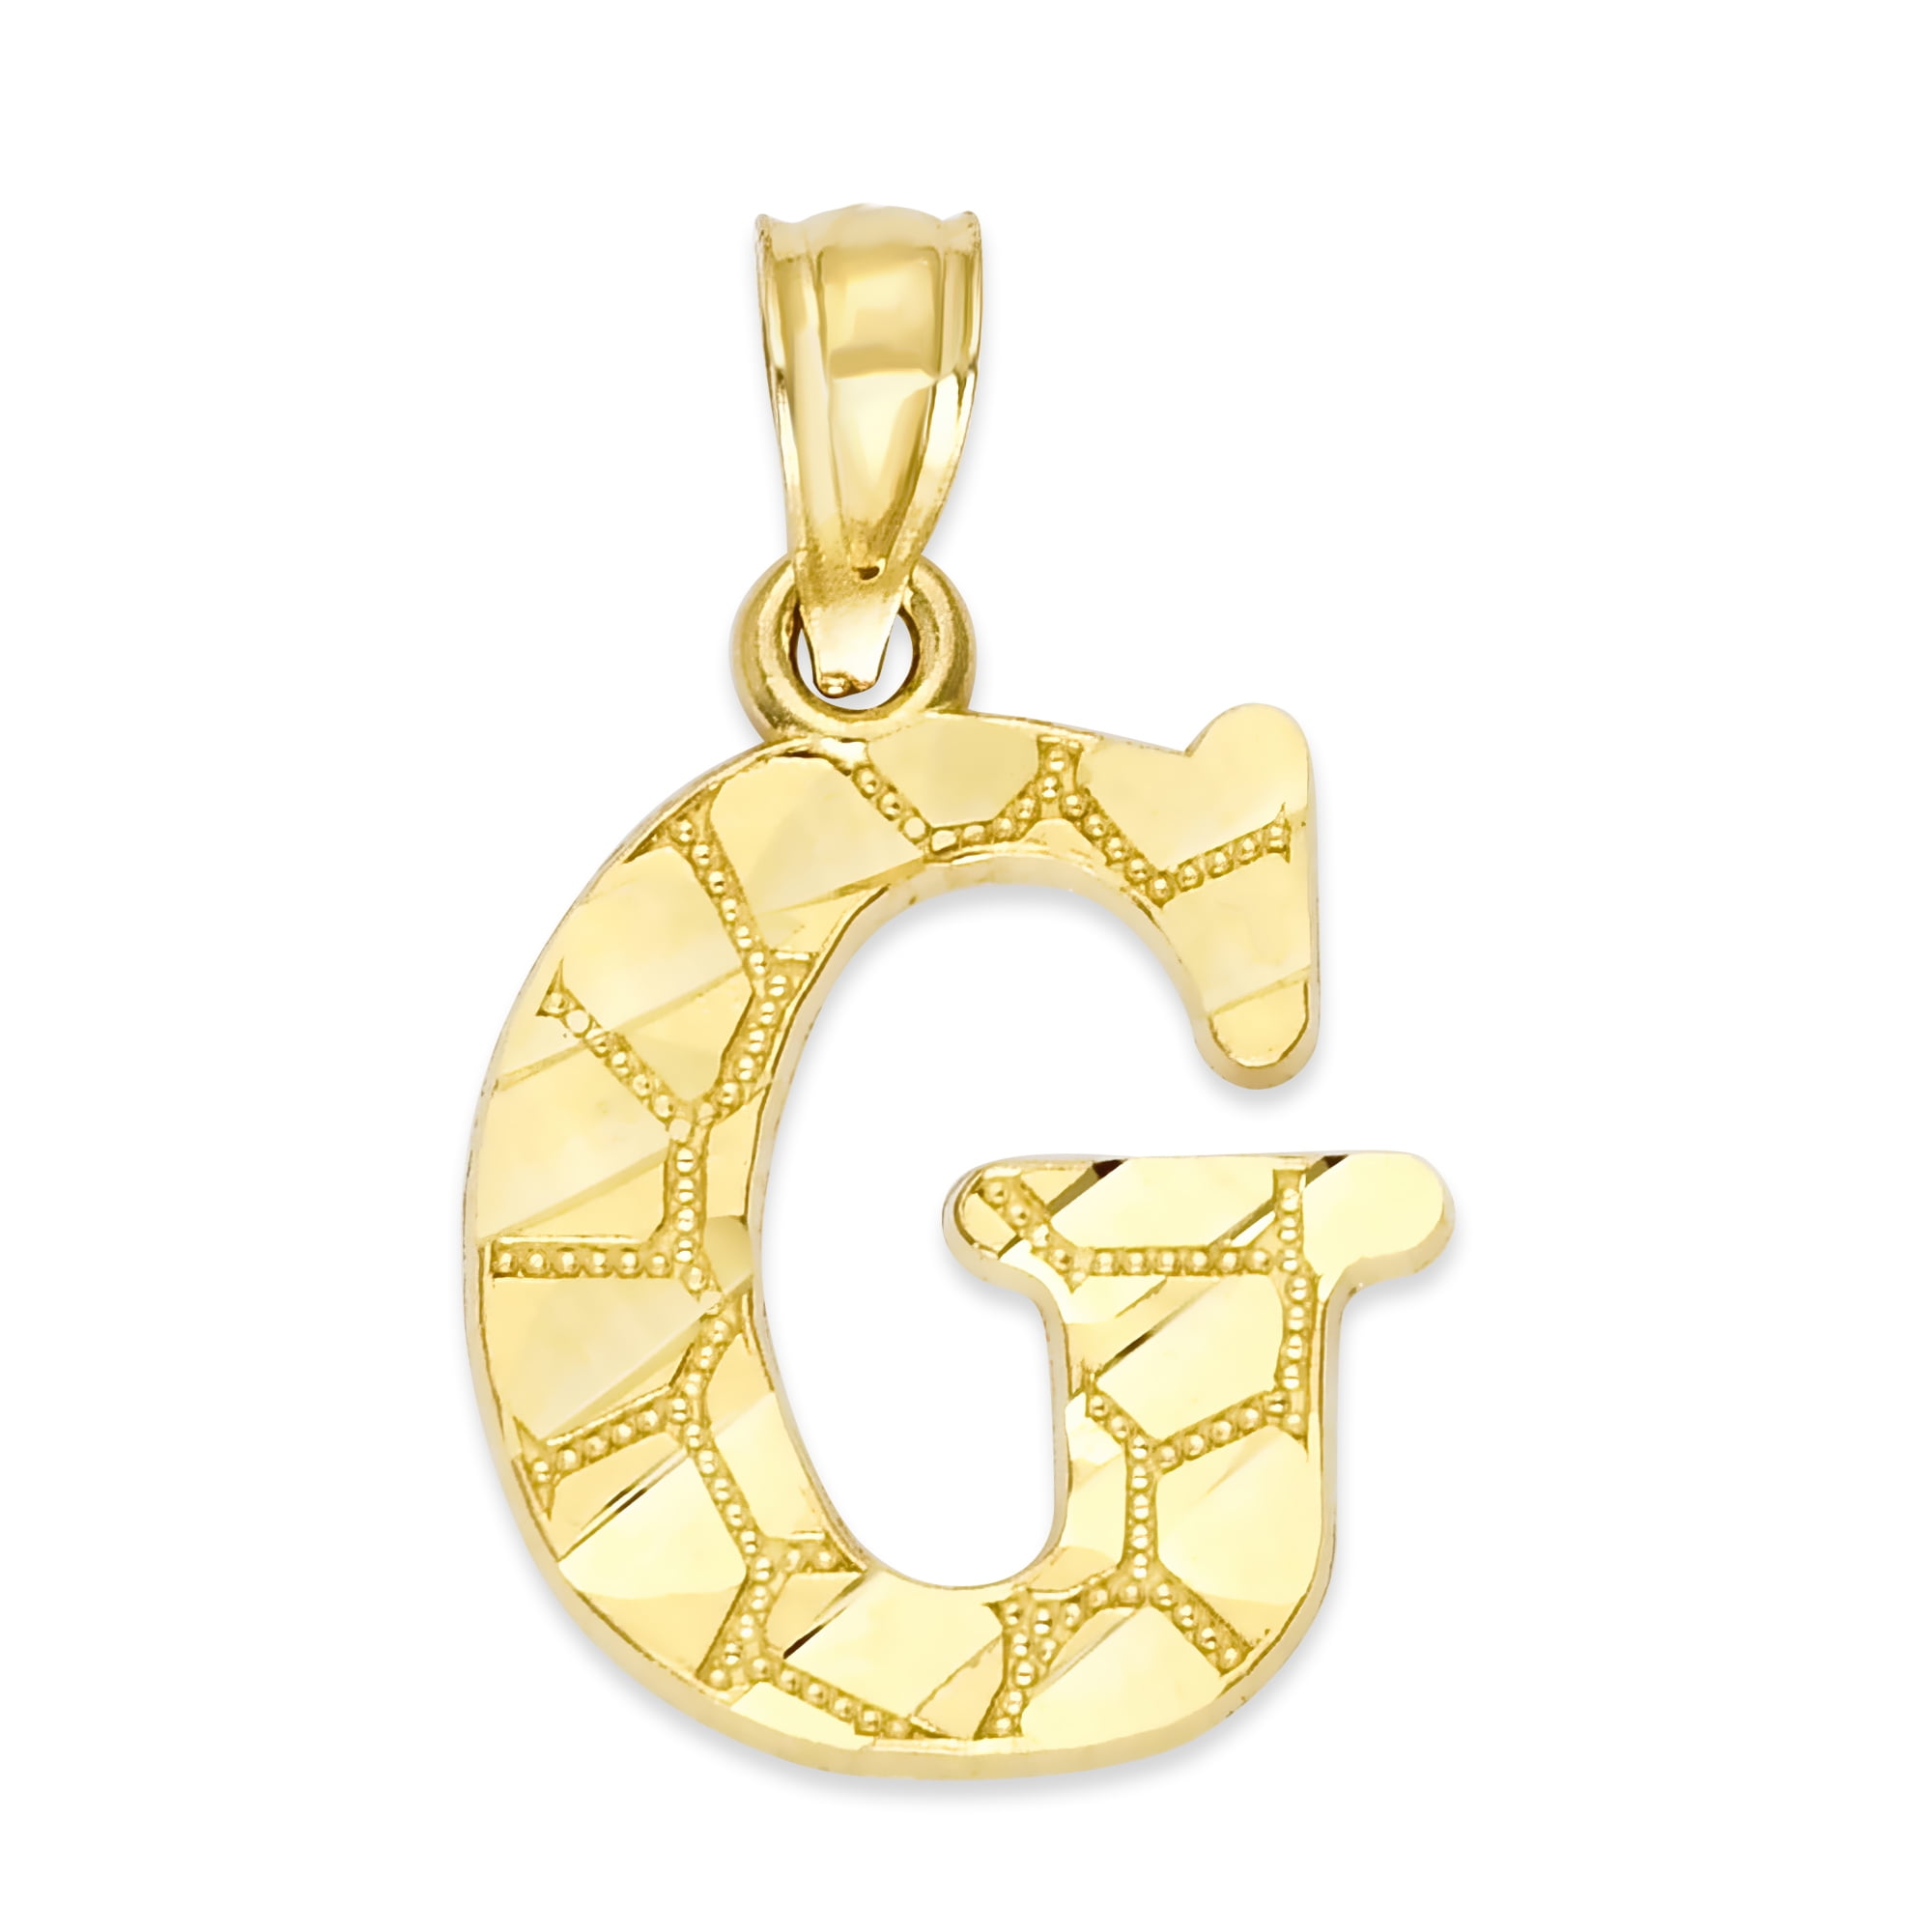 3 Initials Monogram Necklace Solid 14K Yellow Gold 1 1/4 Inches Personalized Jewelry